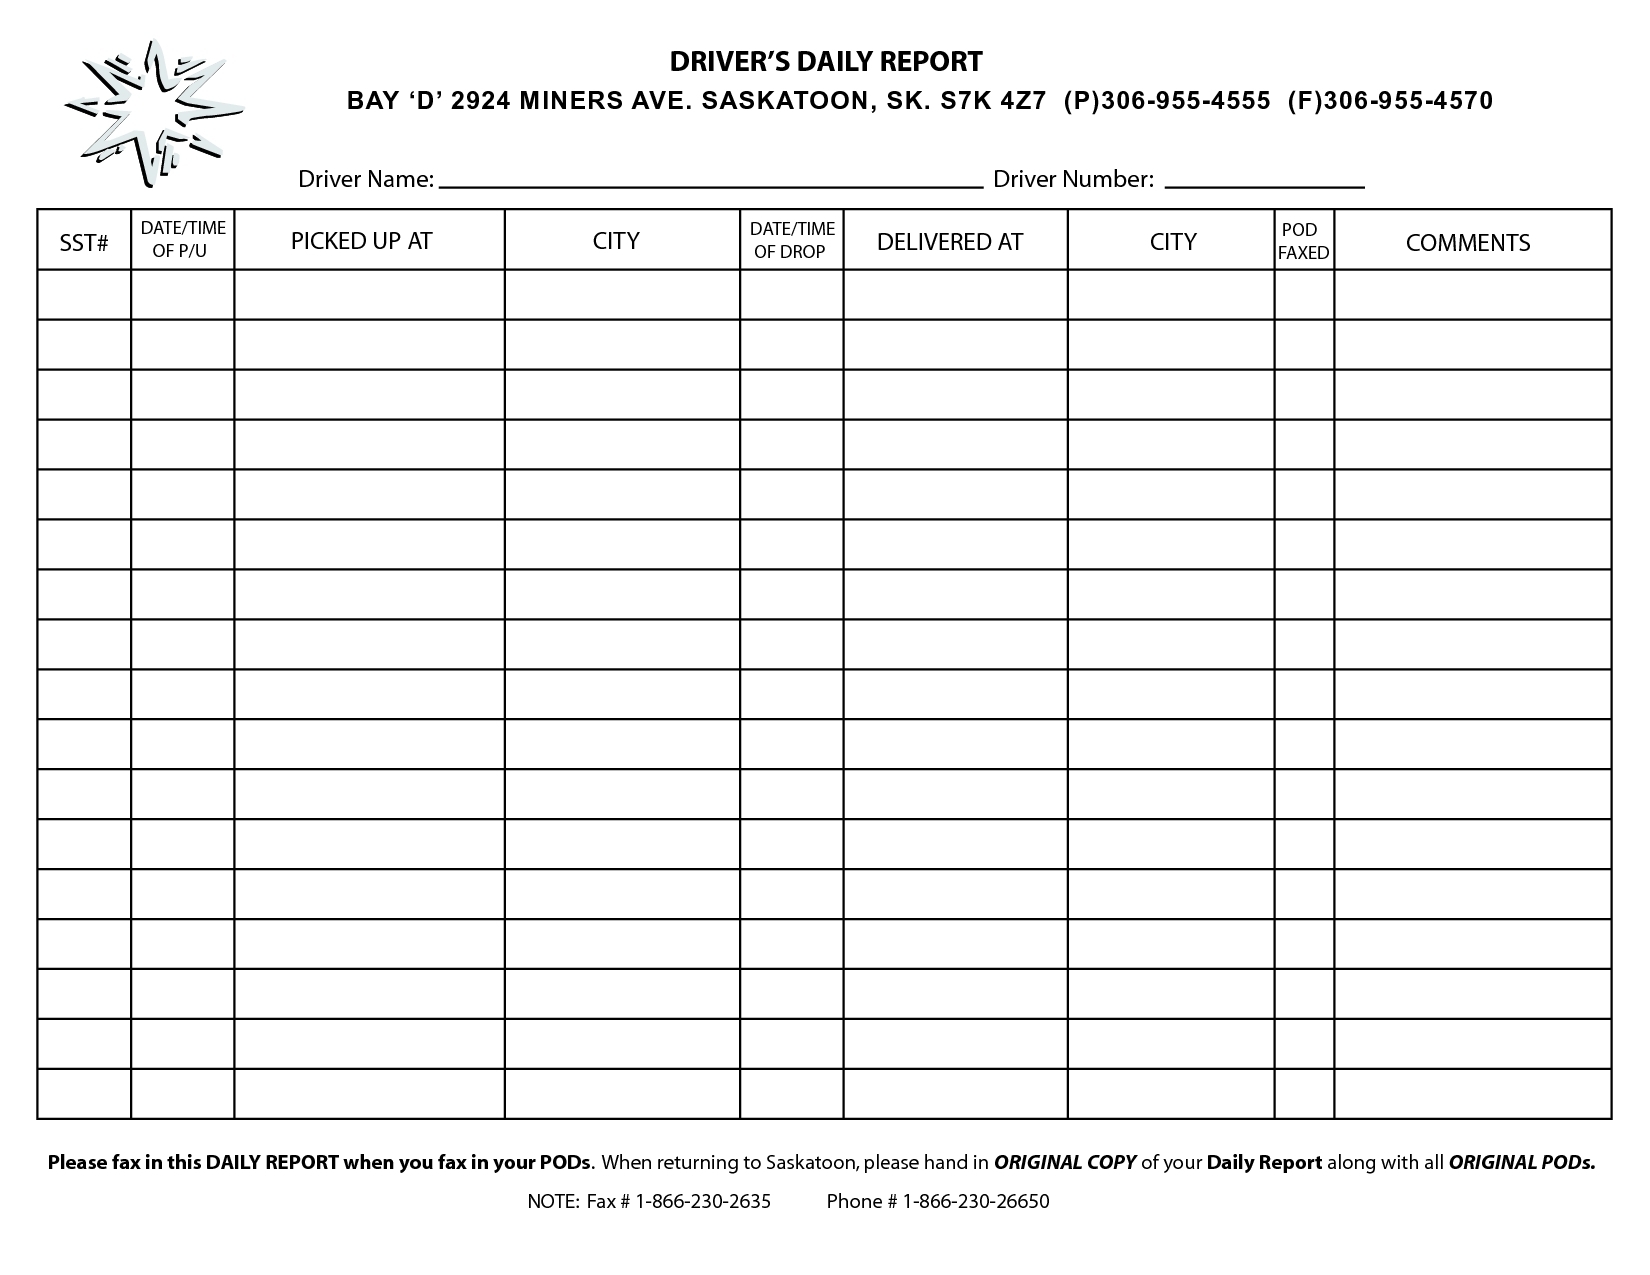 excel driver log sheet template   Boat.jeremyeaton.co